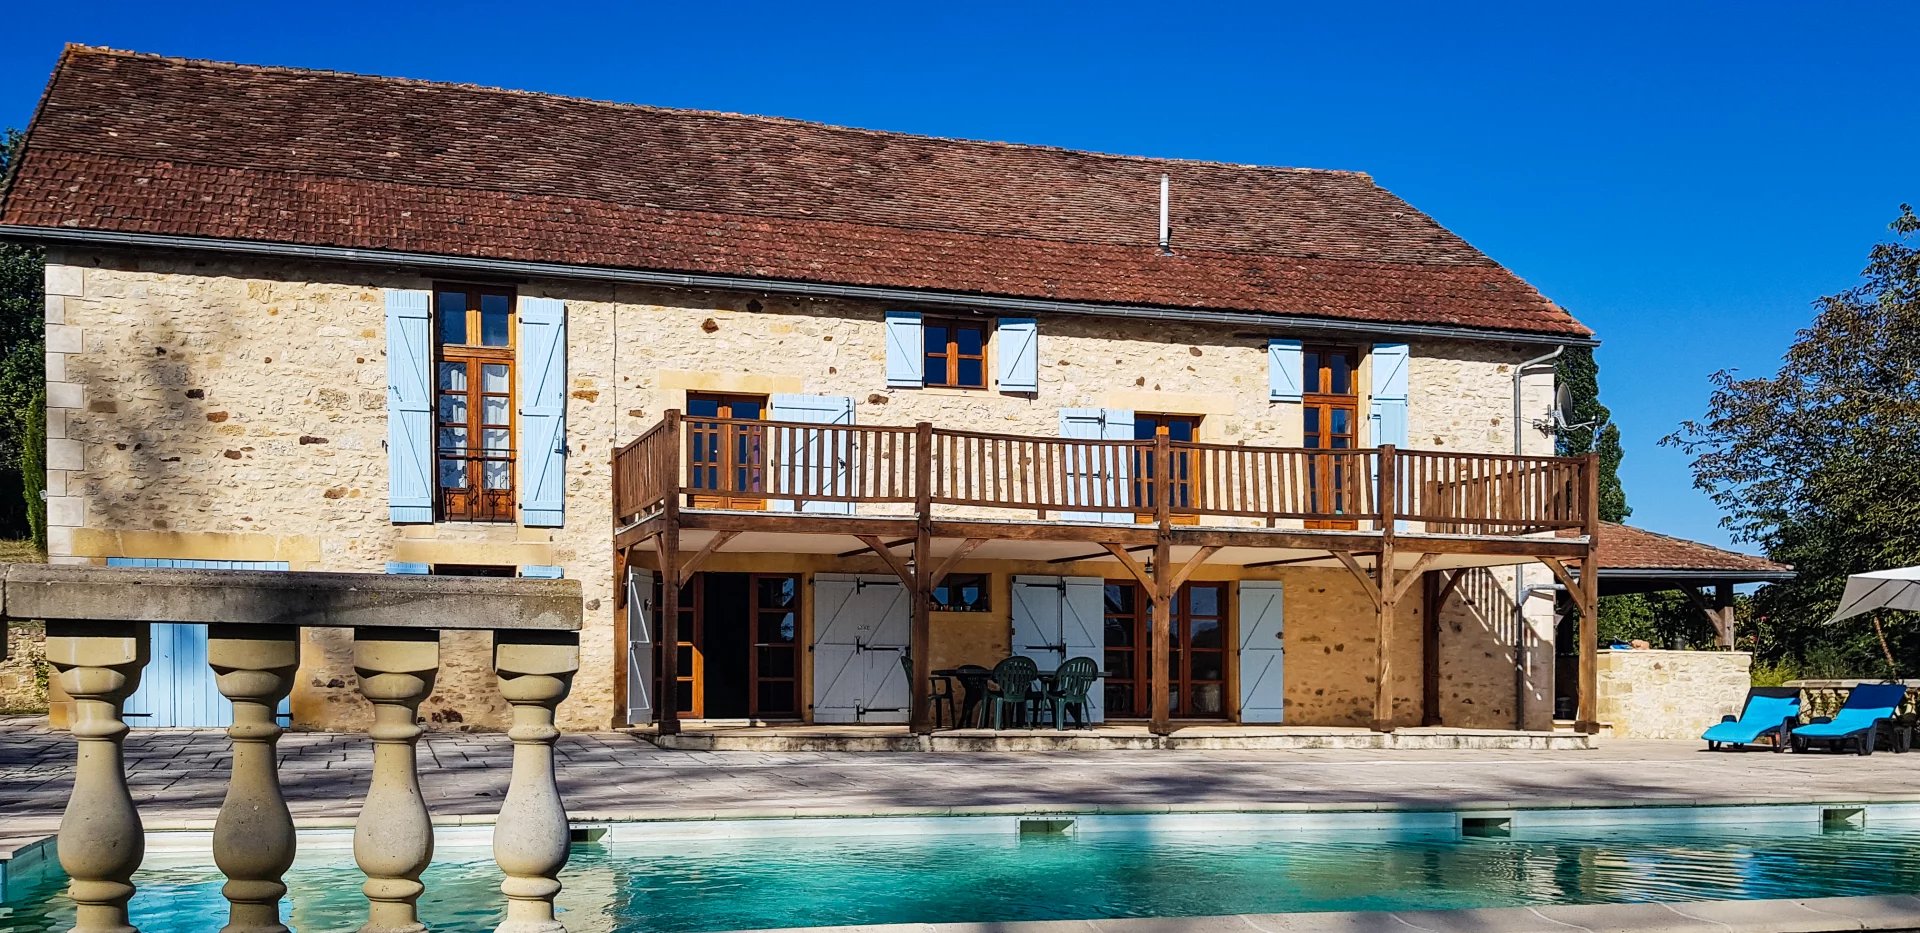 Prestigious barn conversion with pool, guest house and stunning views, 2km from a bustling town.